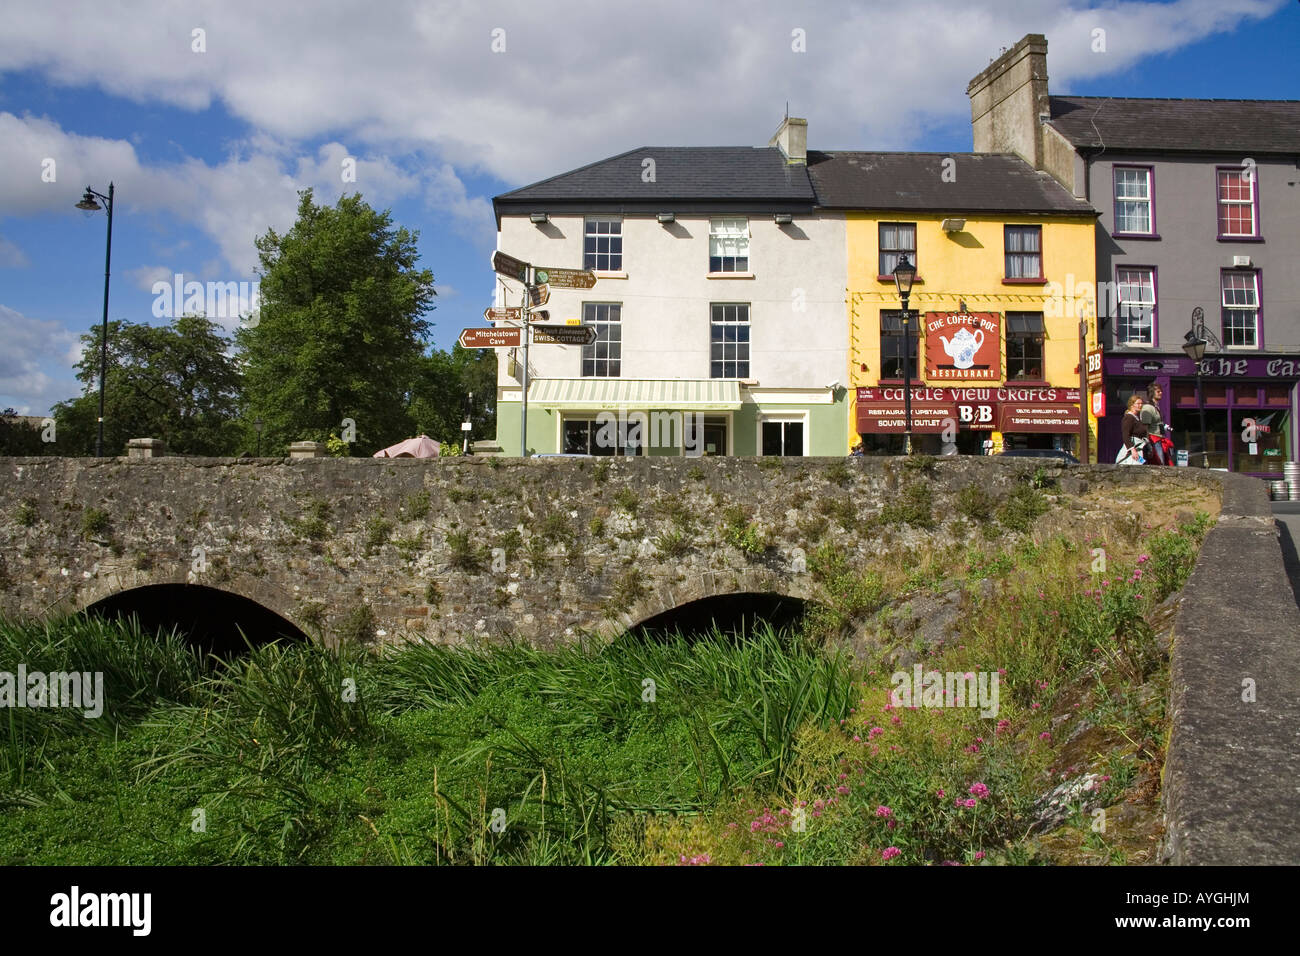 15 Best Things to Do in Clonmel (Ireland) - The Crazy Tourist